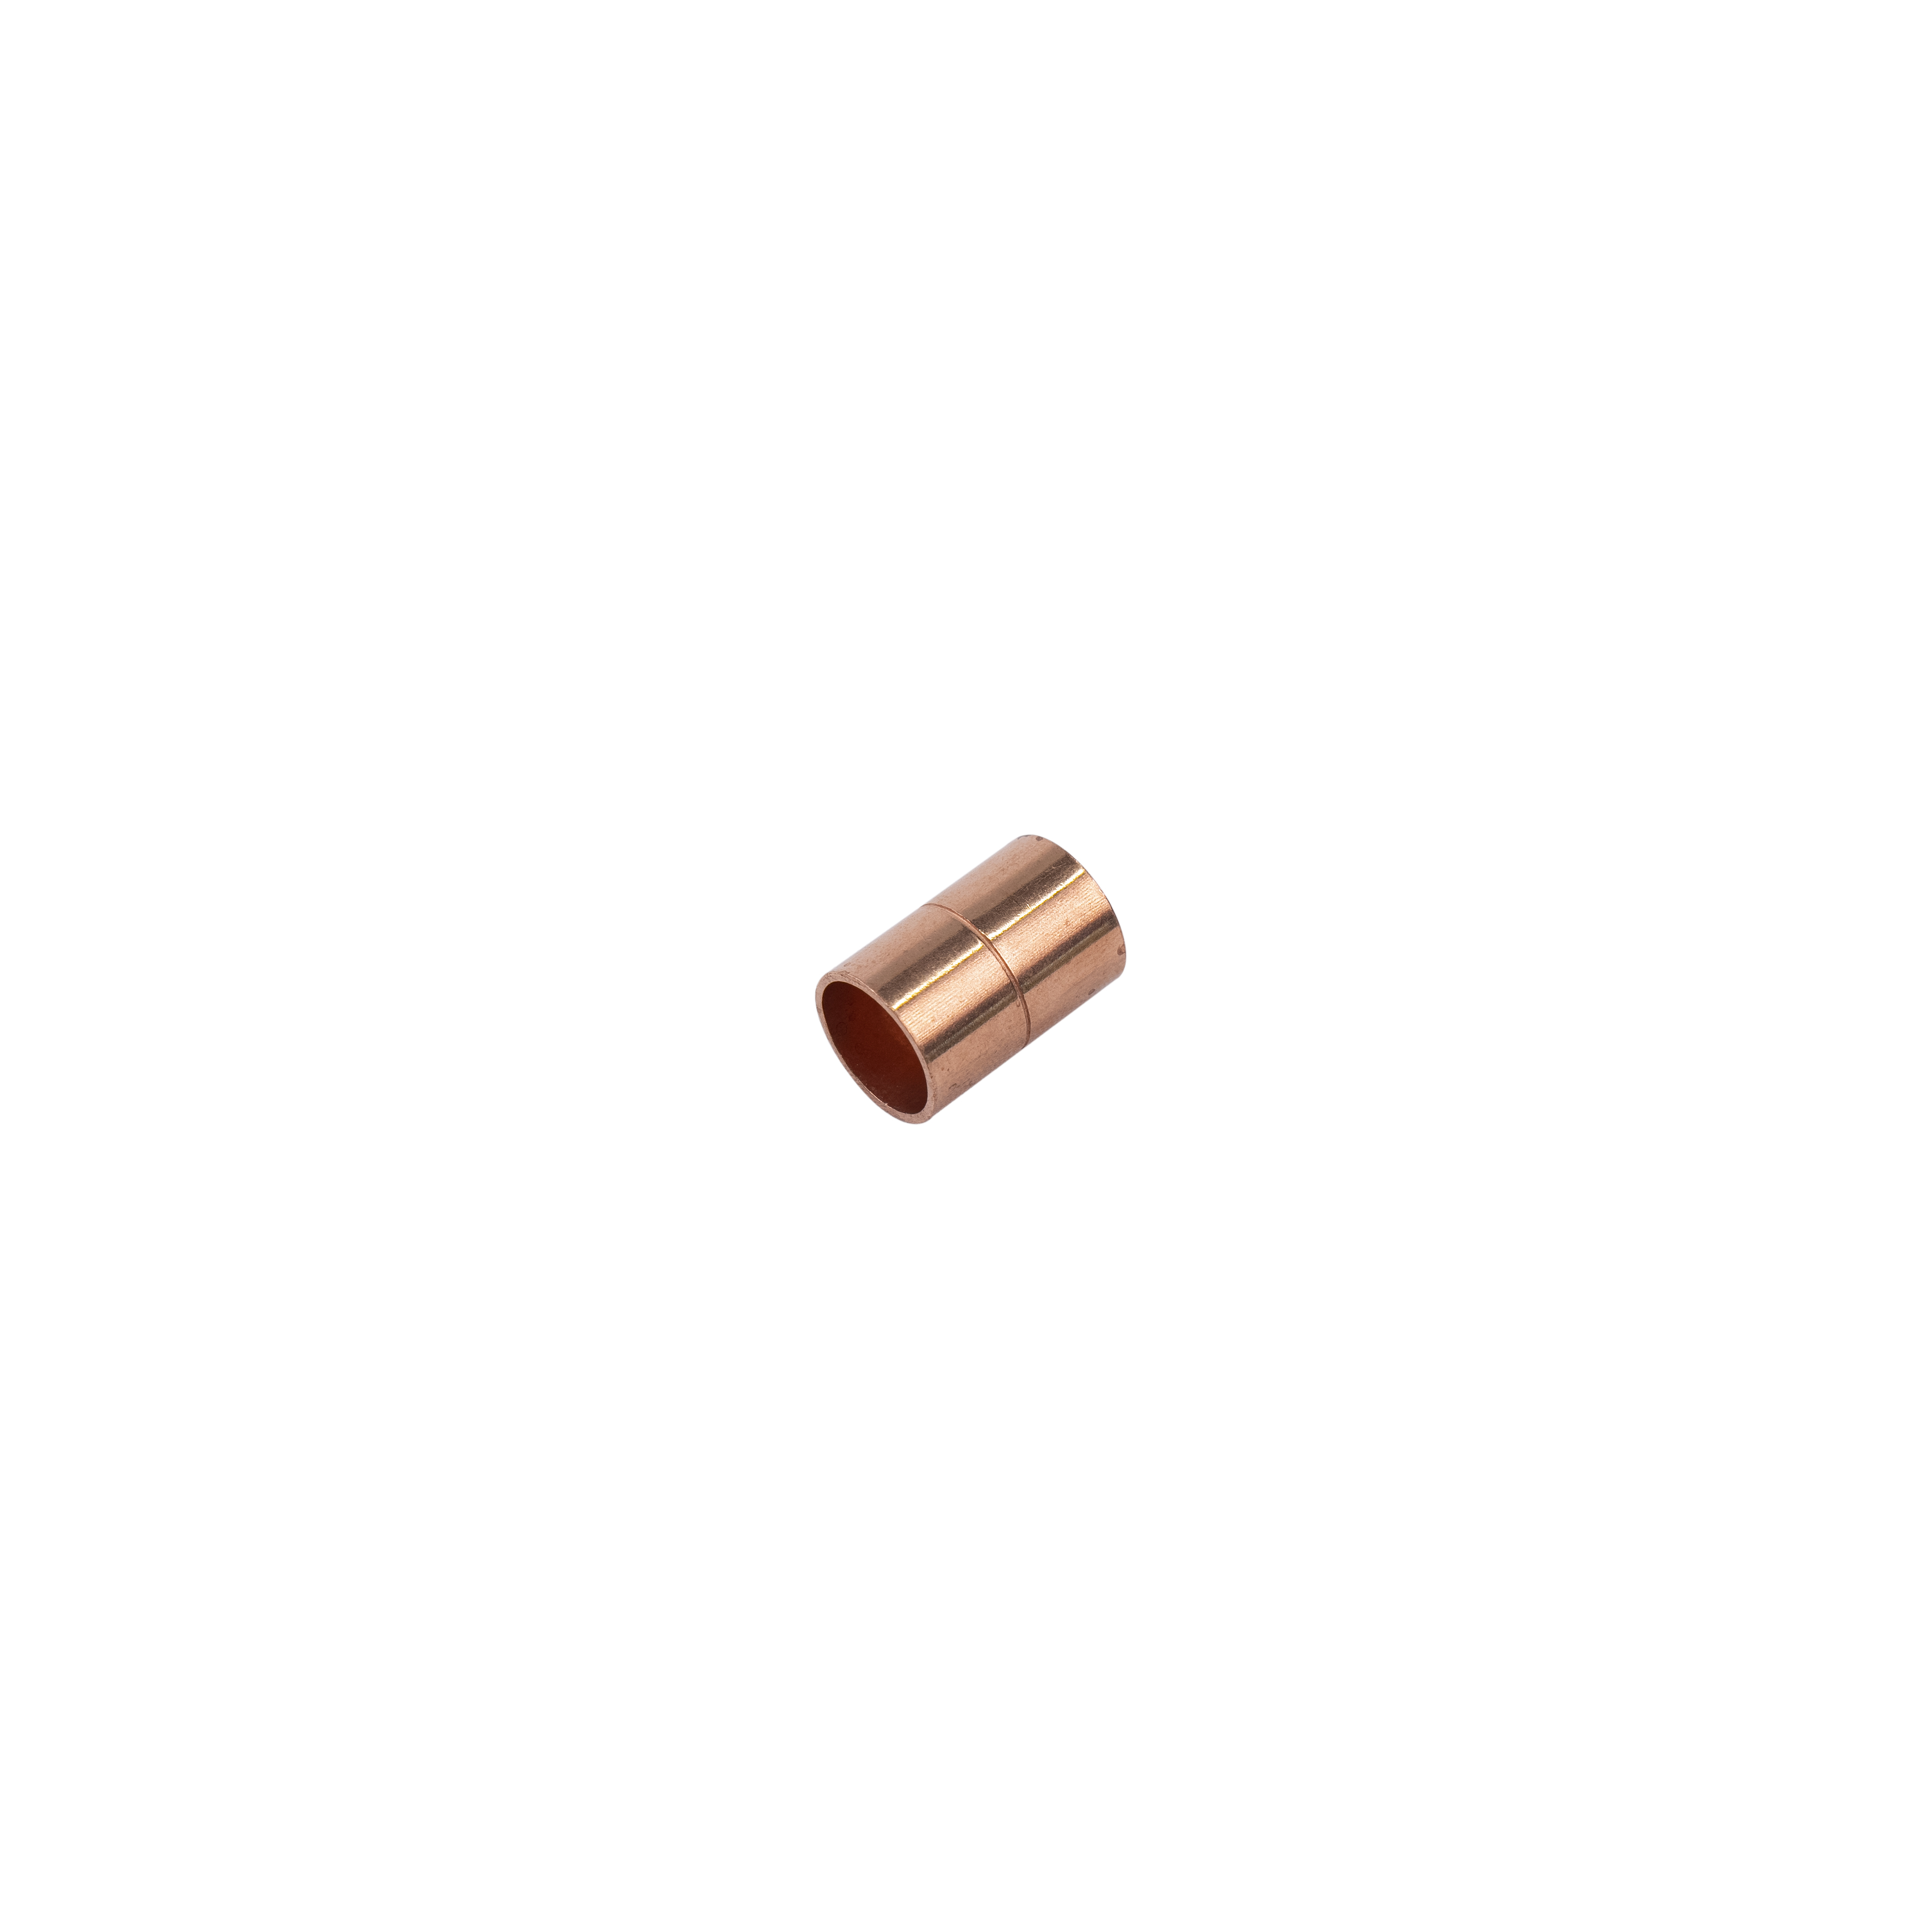 1/2 Inch Copper Coupling R410a